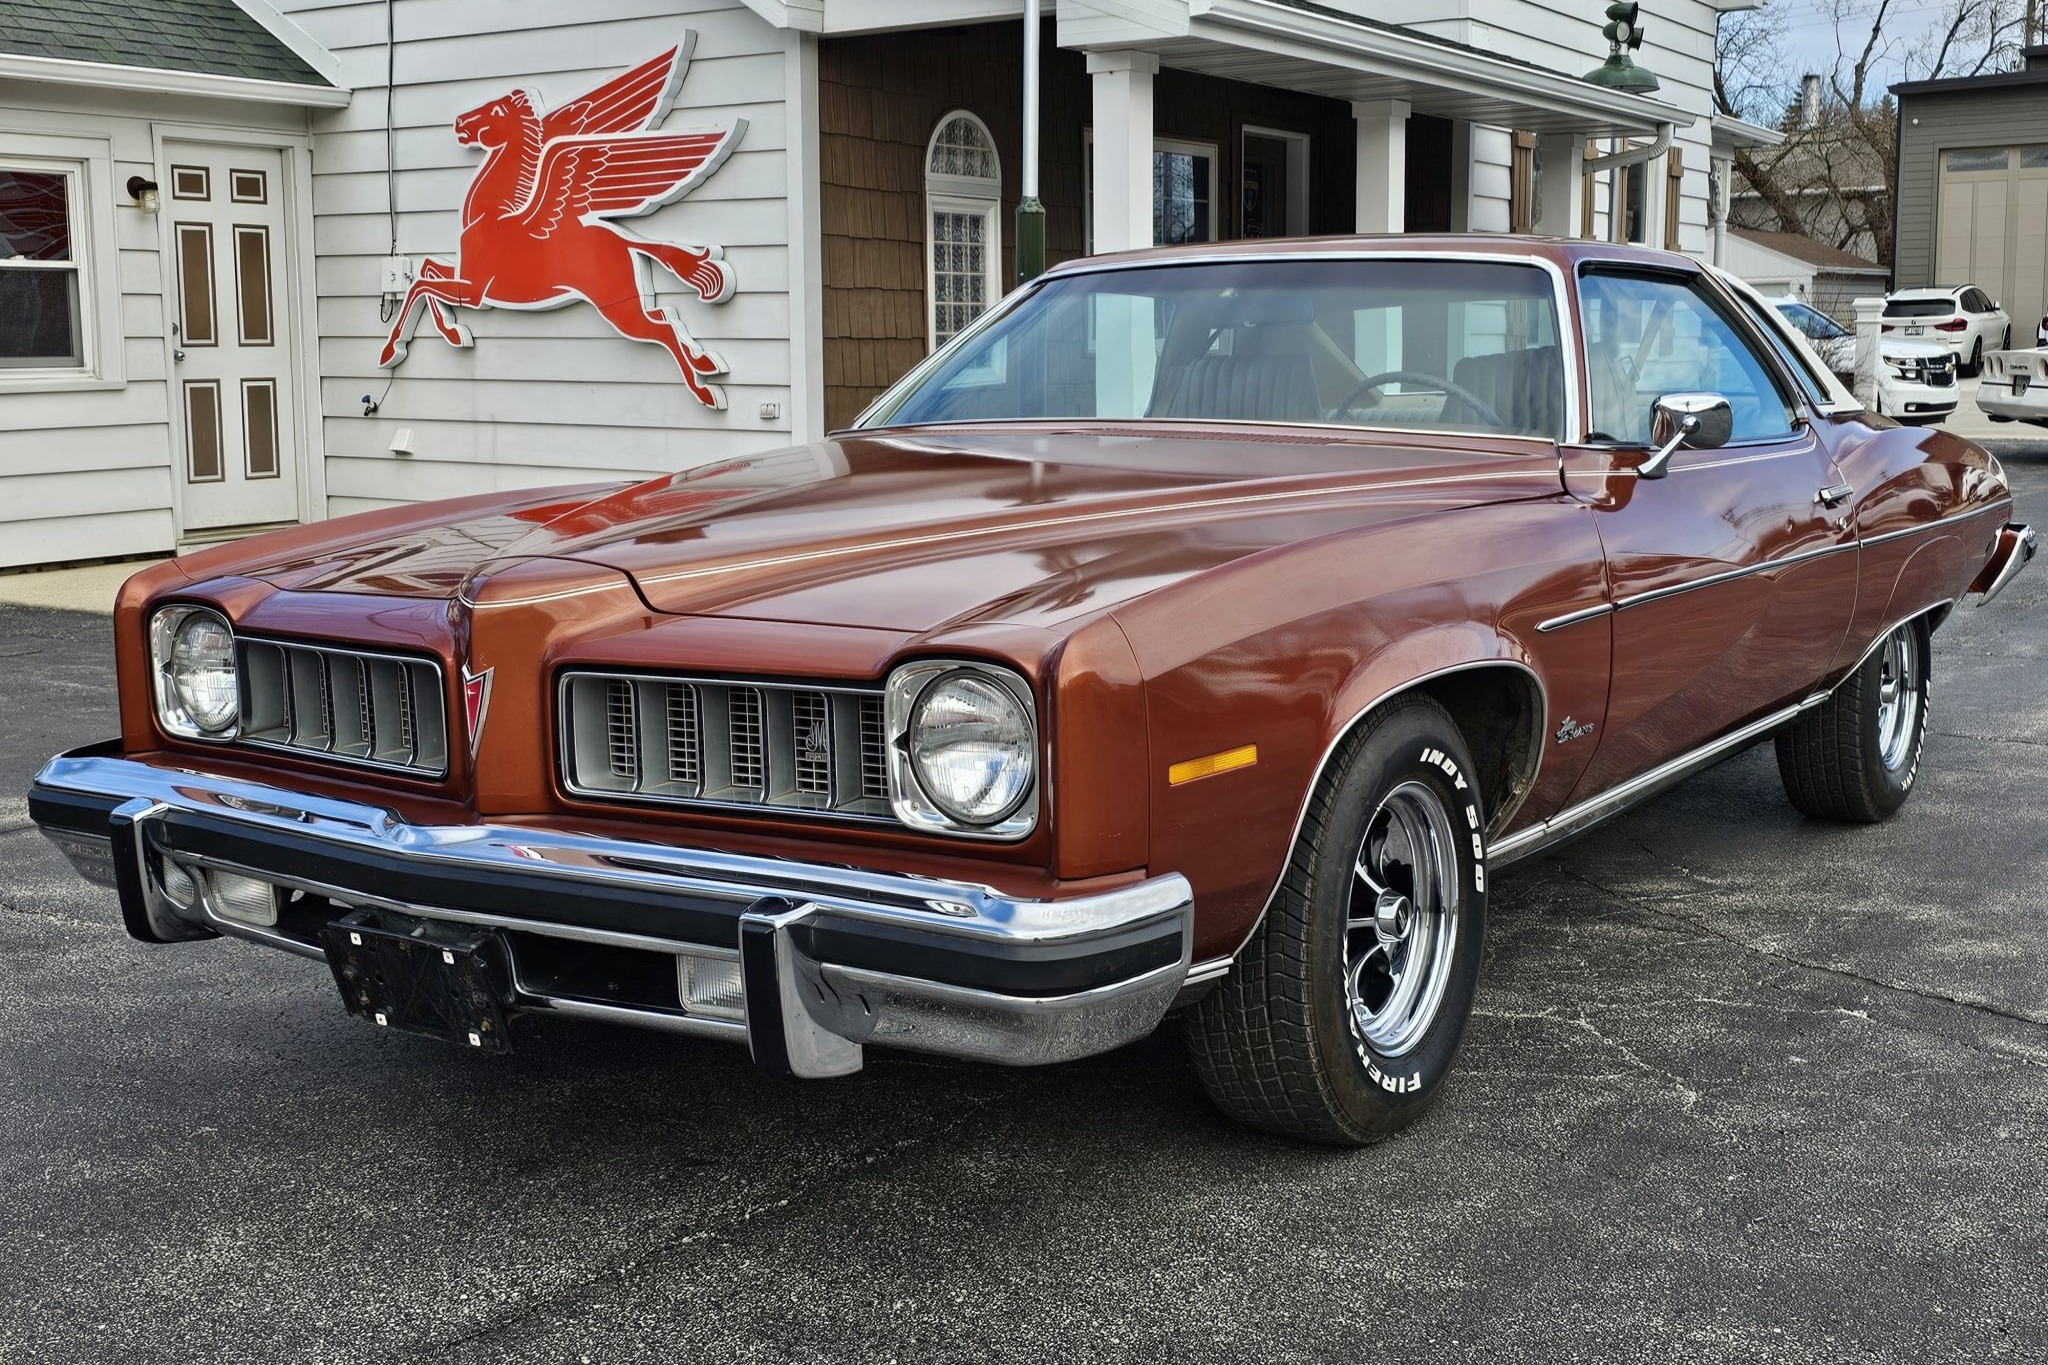 Used 1974 Pontiac LeMans Luxury Colonnade Hardtop Coupe Review